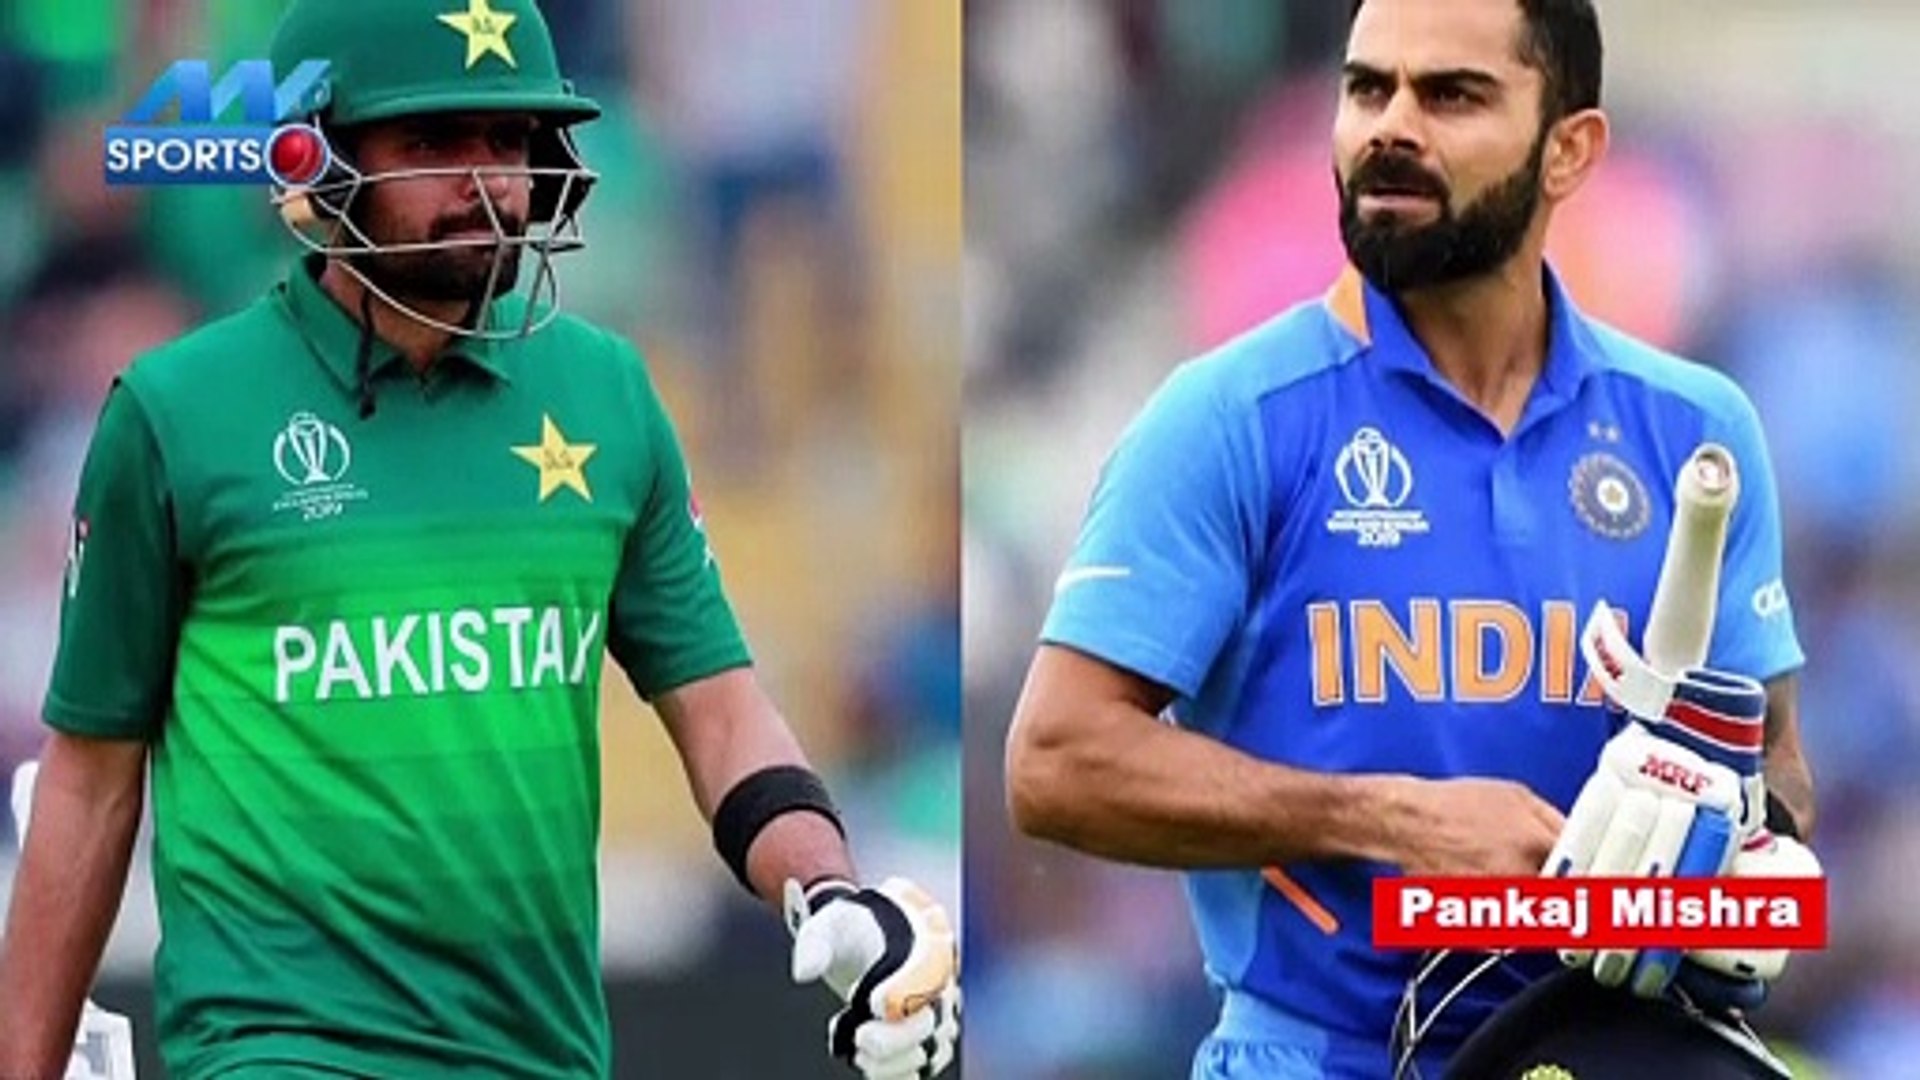 IND vs PAK: Teams of India and Pakistan will be face to face again!